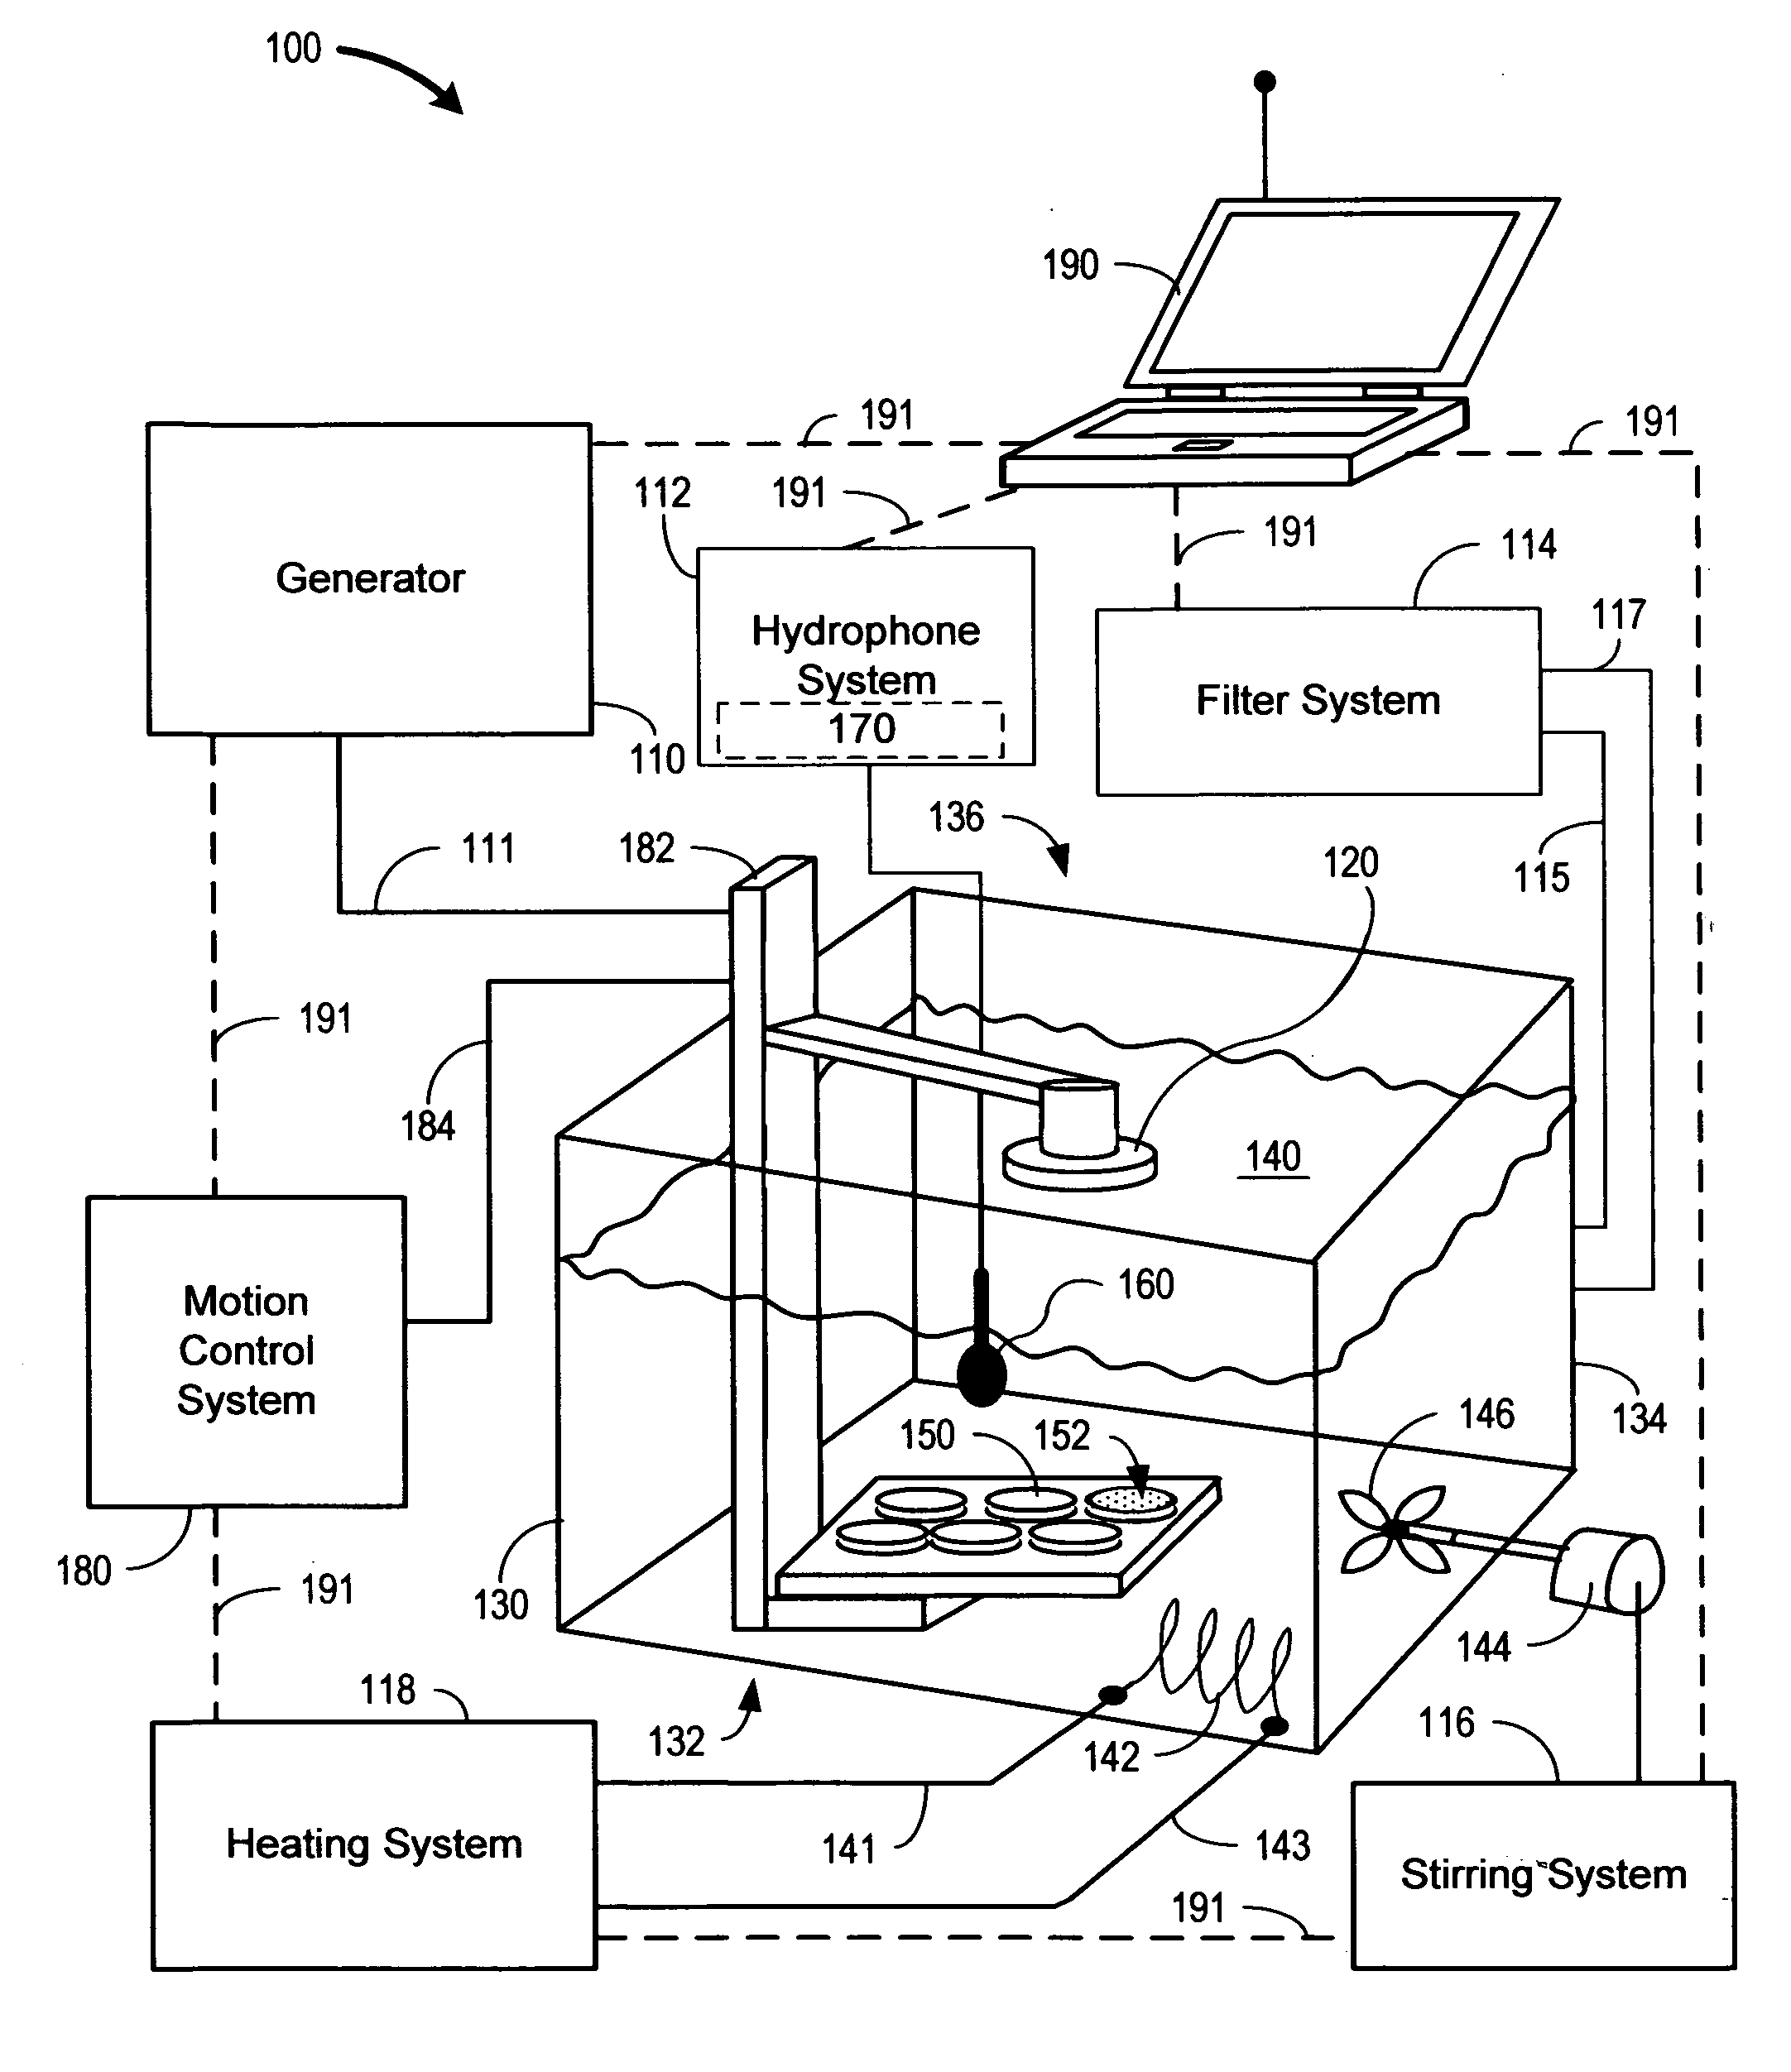 Sonoporation systems and methods